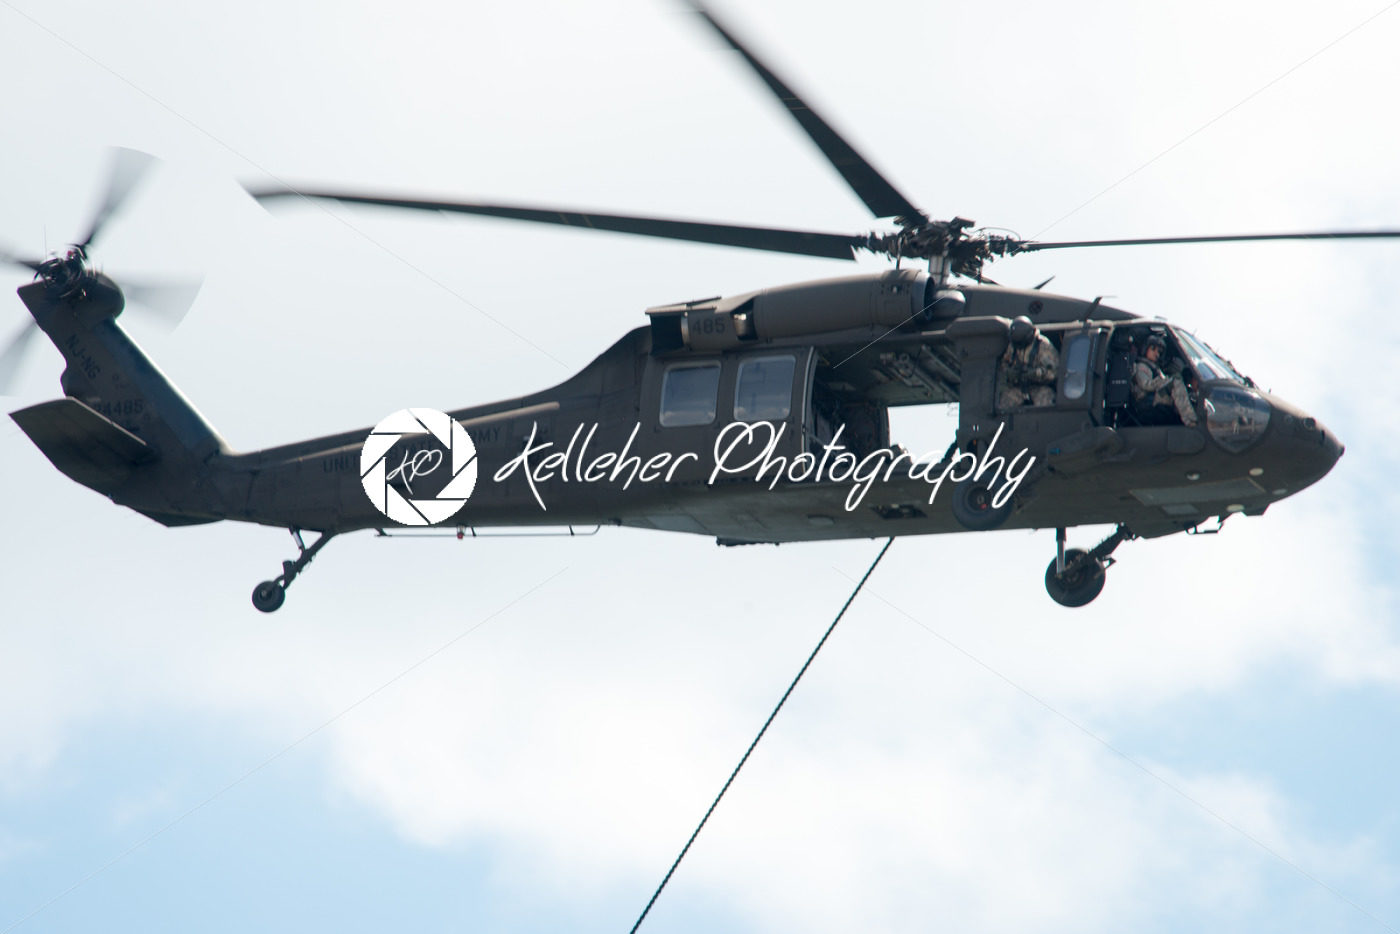 ATLANTIC CITY, NJ – AUGUST 17: US Army Helicopter at Annual Atlantic City Air Show on August 17, 2016 - Kelleher Photography Store